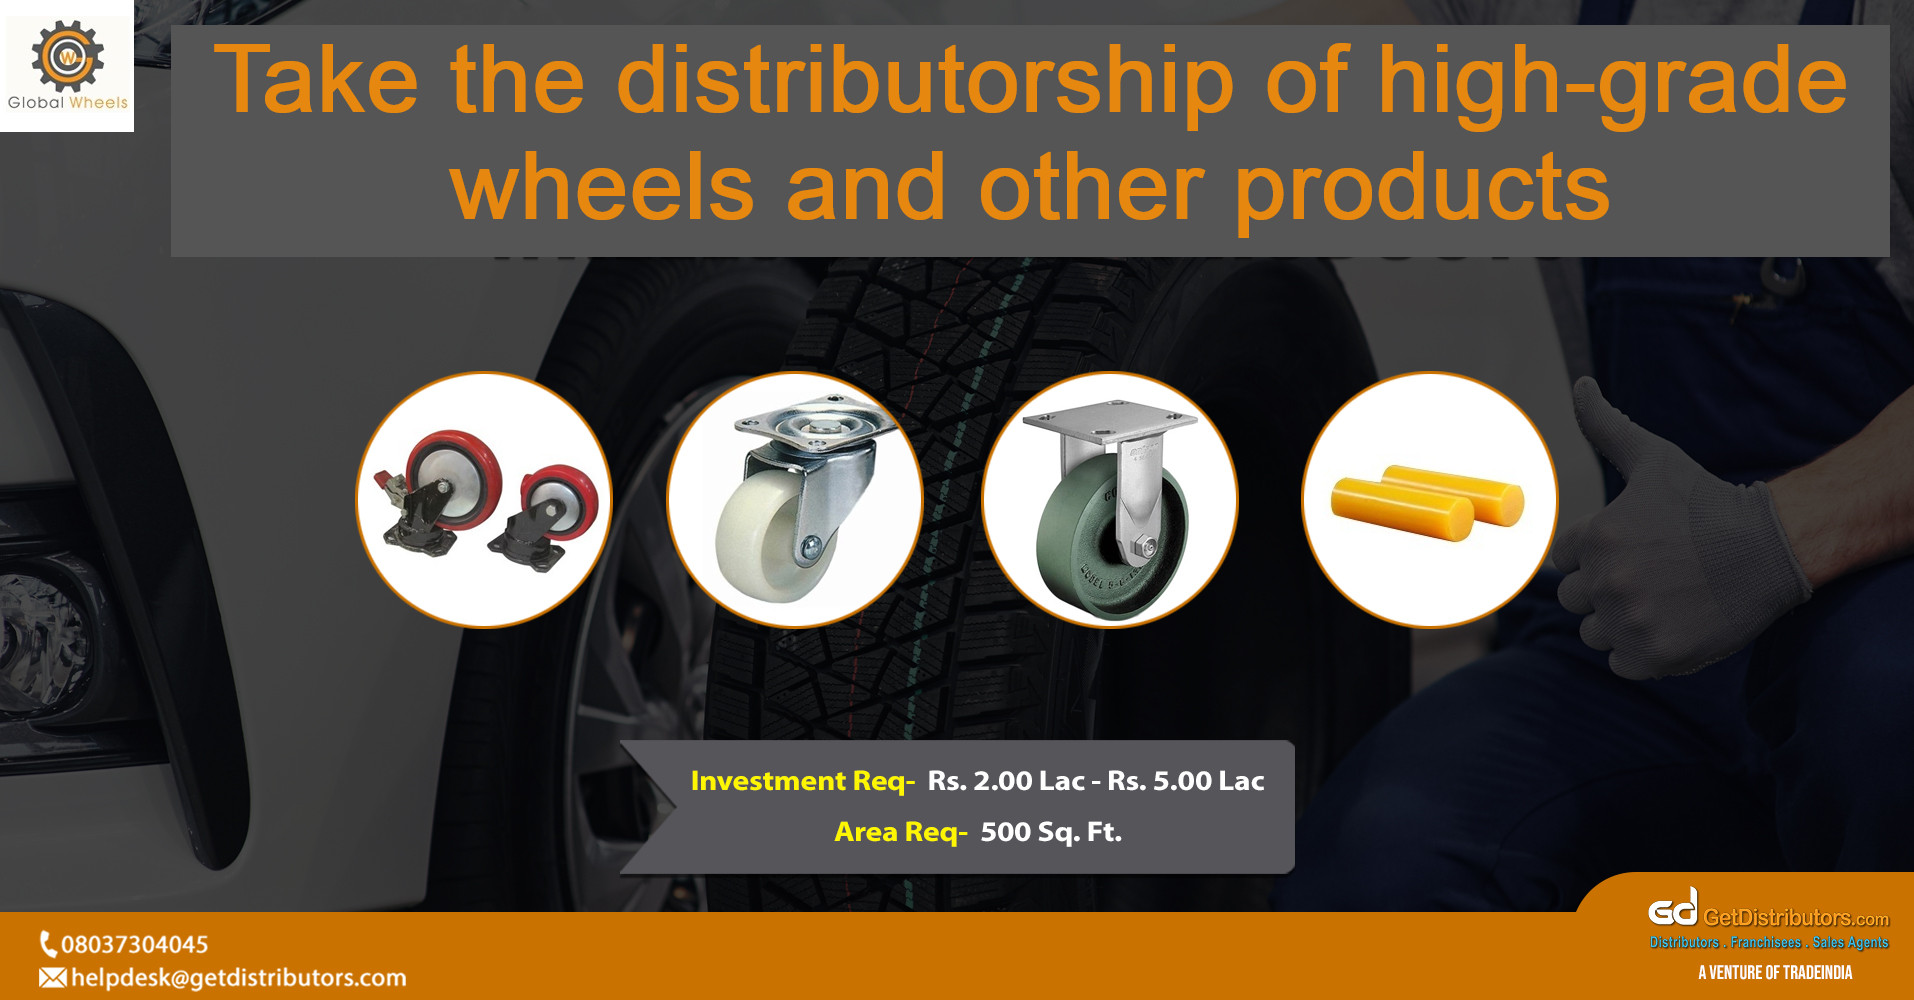 Take the distributorship of high-grade wheels and other products